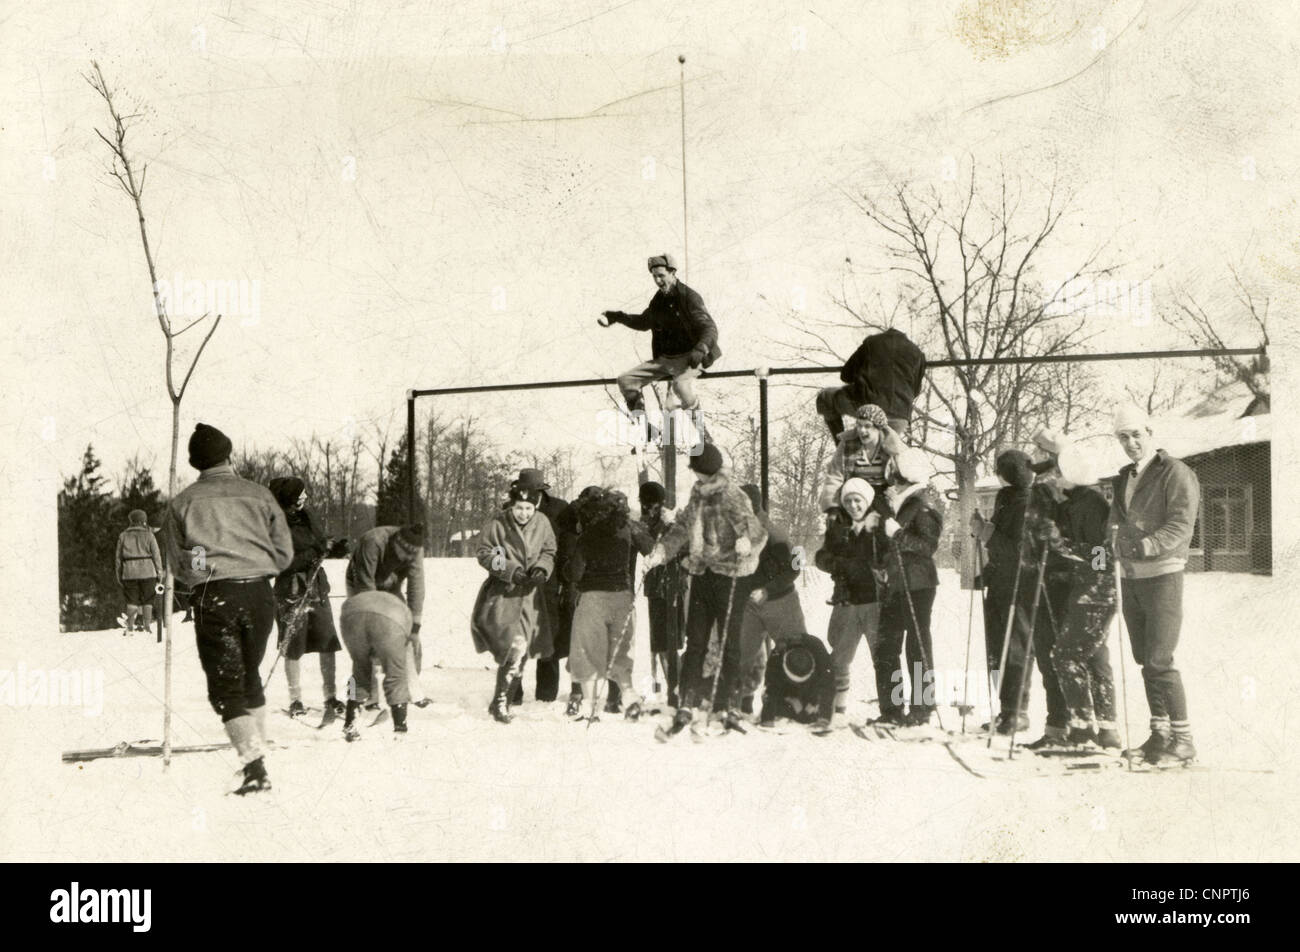 Circa 1930s photograph, group of college students having a snowball fight before a cross country ski trip. Stock Photo